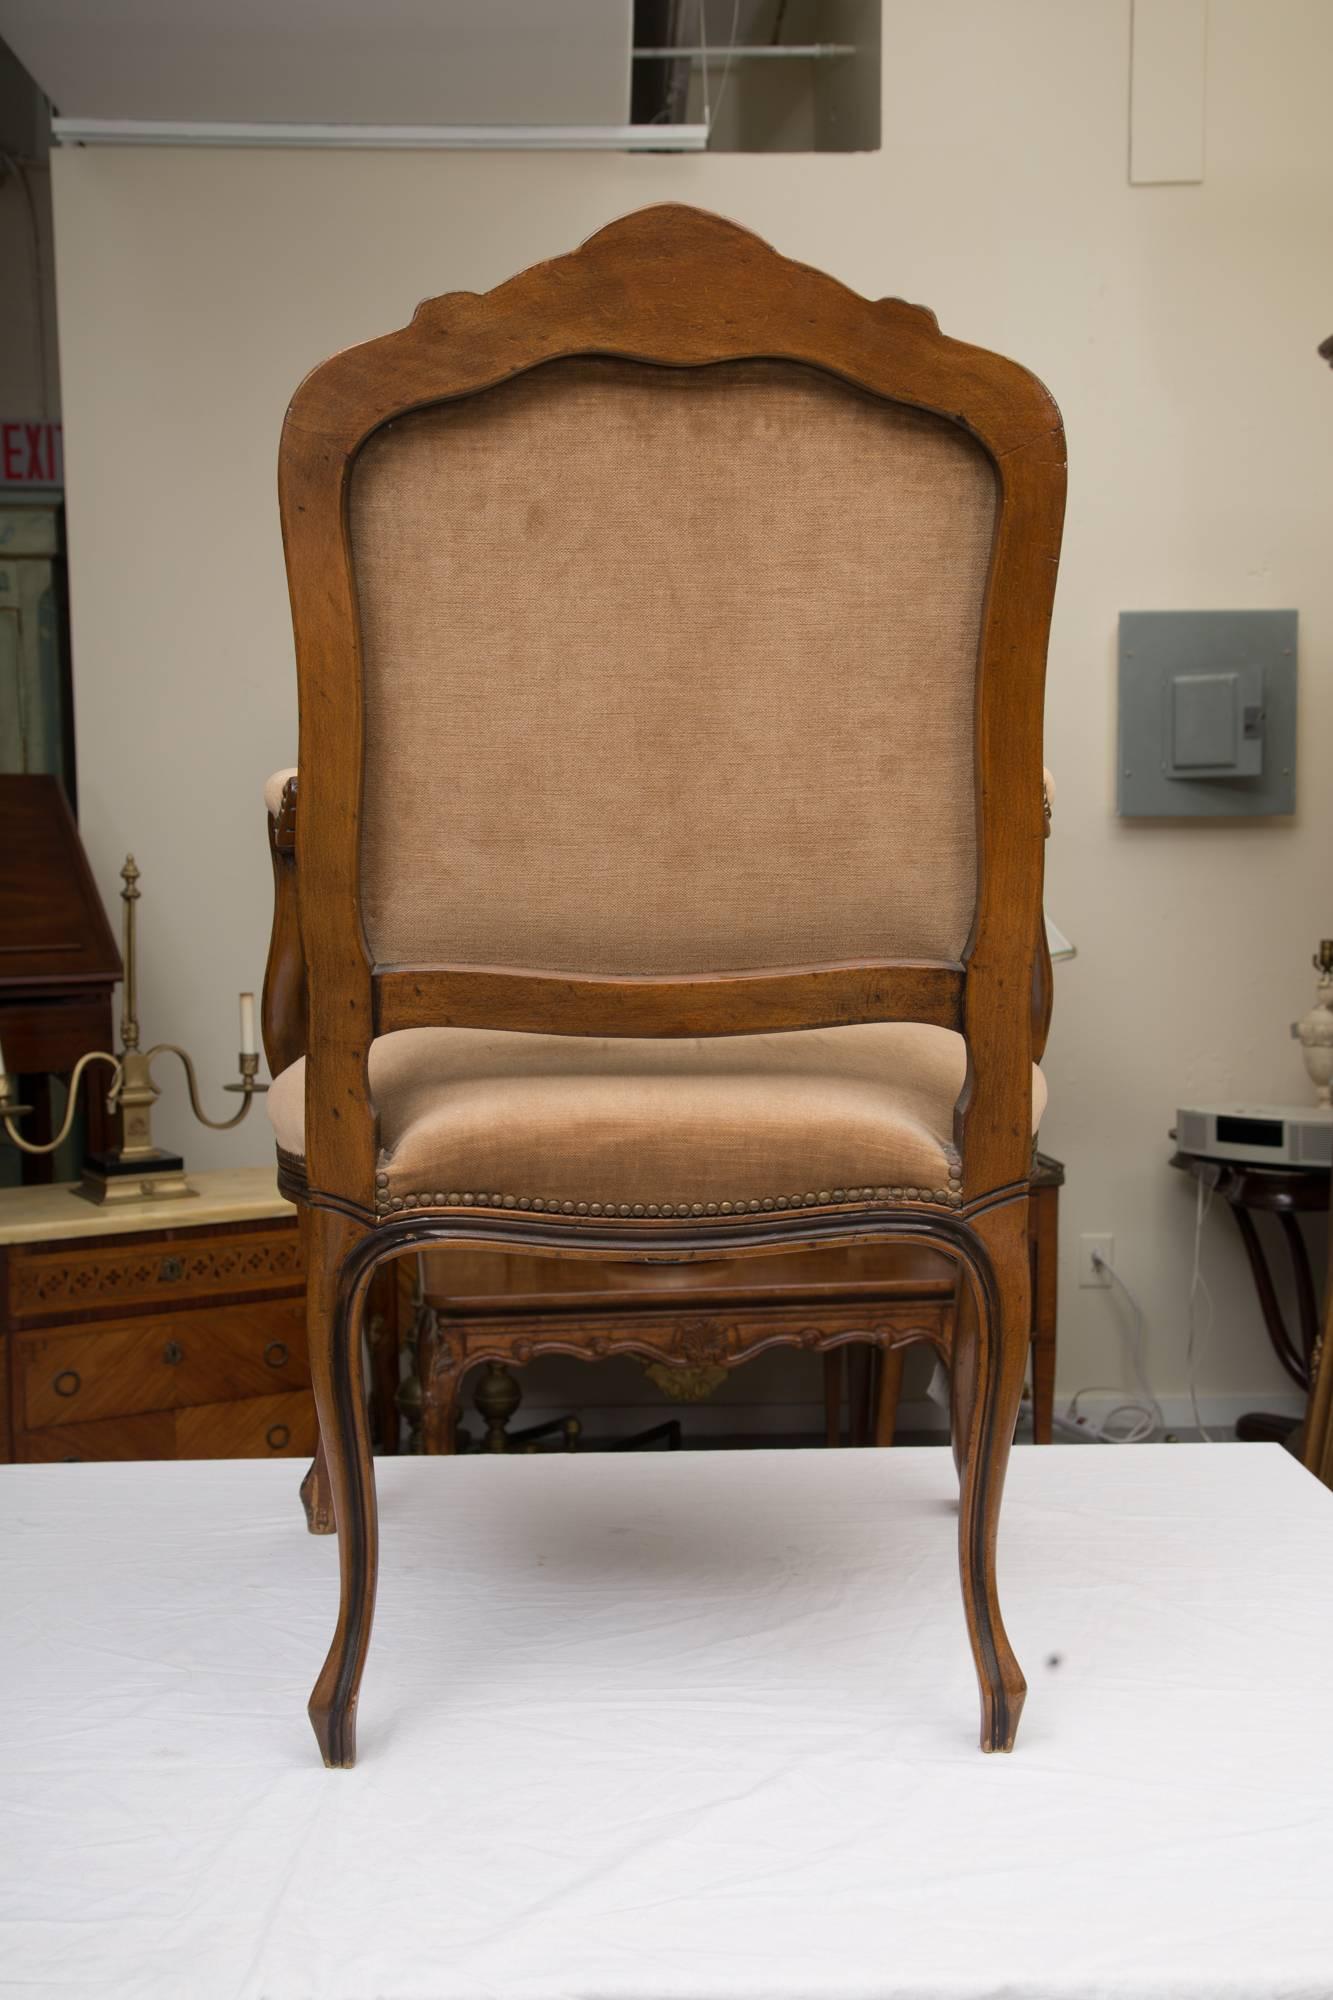 These chairs are hand-carved and upholstered in a soft neutral fabric. Although the chairs are 20th century they are modeled after the design of the period.